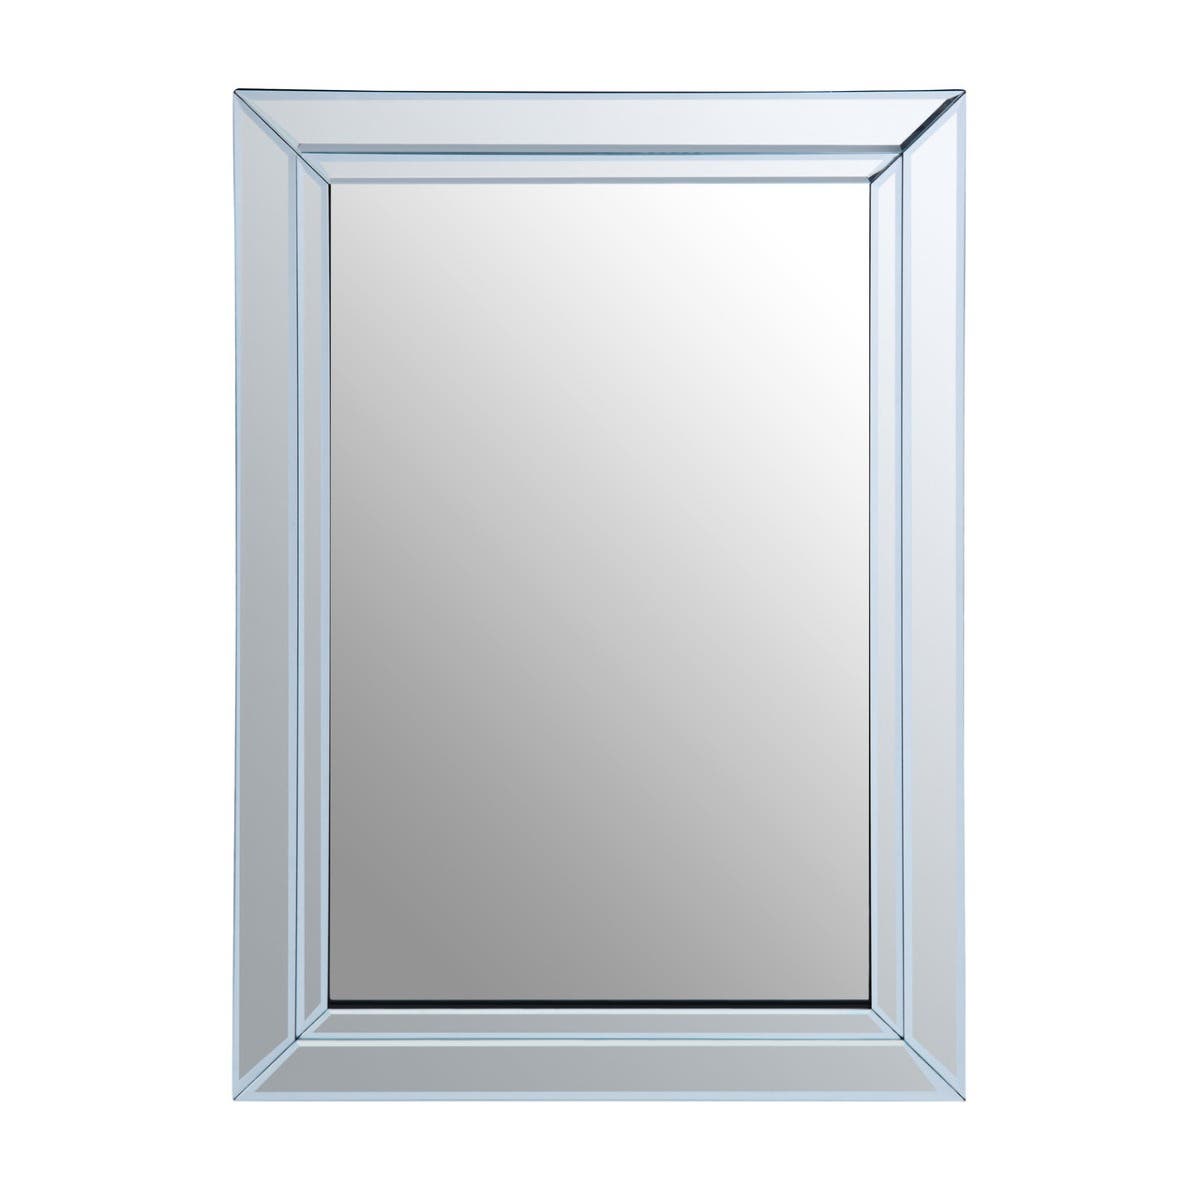 Sana Large Square Bevelled Wall Mirror